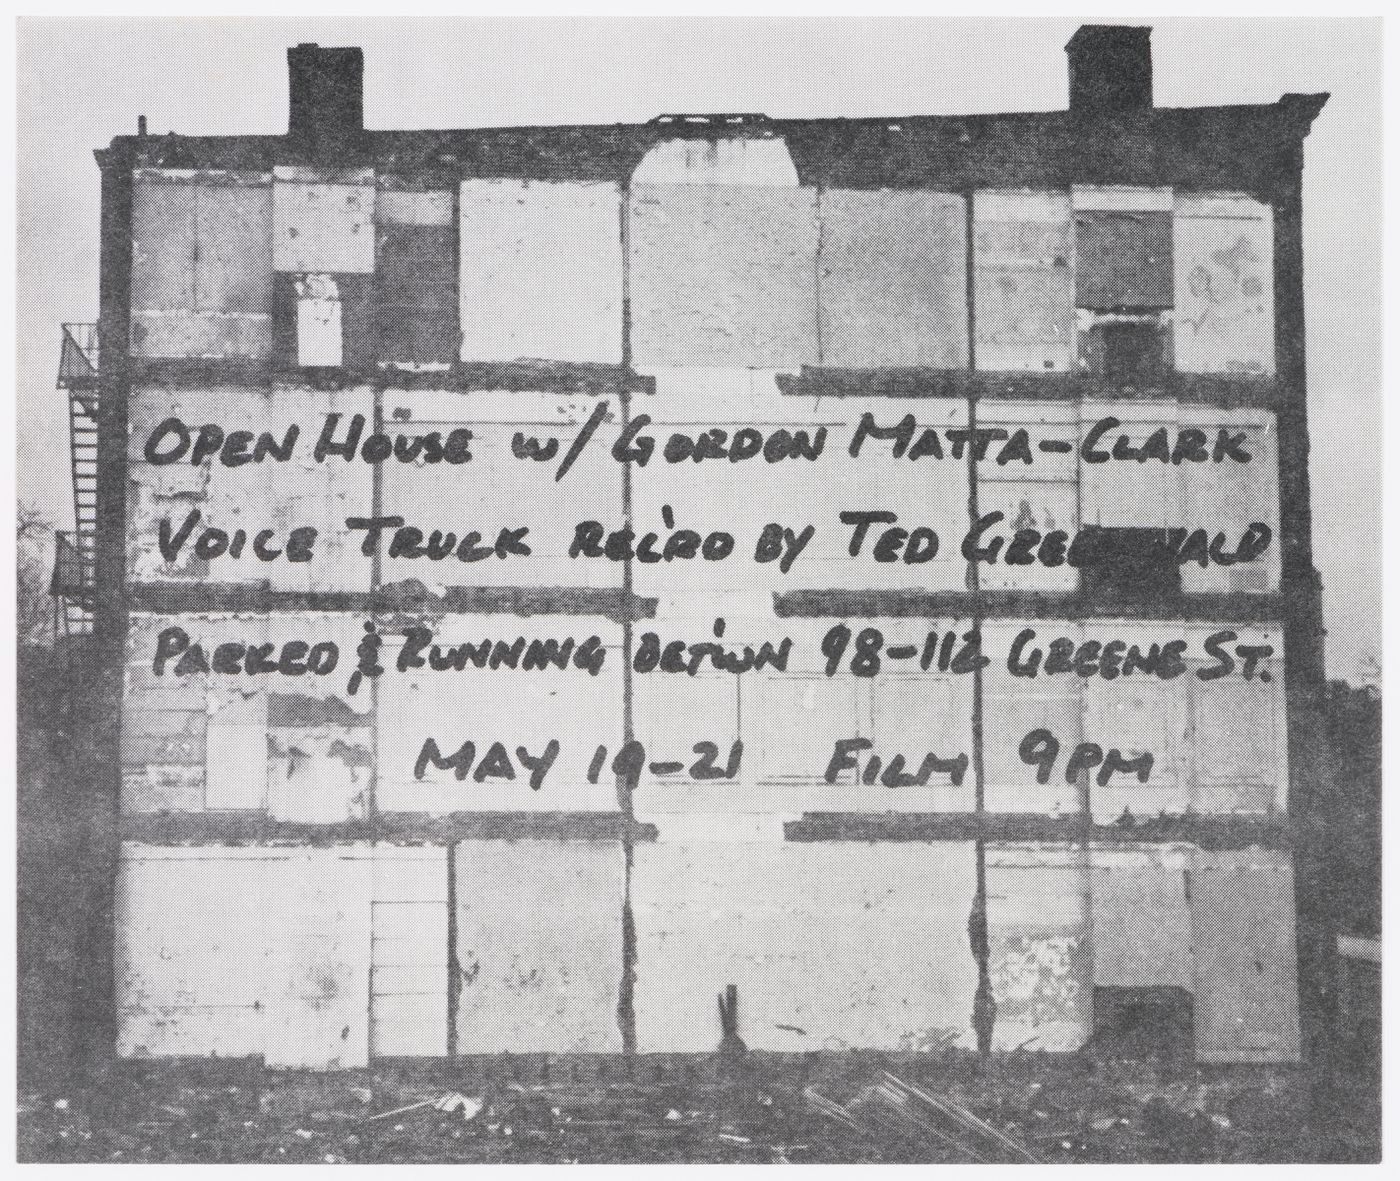 Announcement for "Open House" held at  98-112 Greene Street, New York City